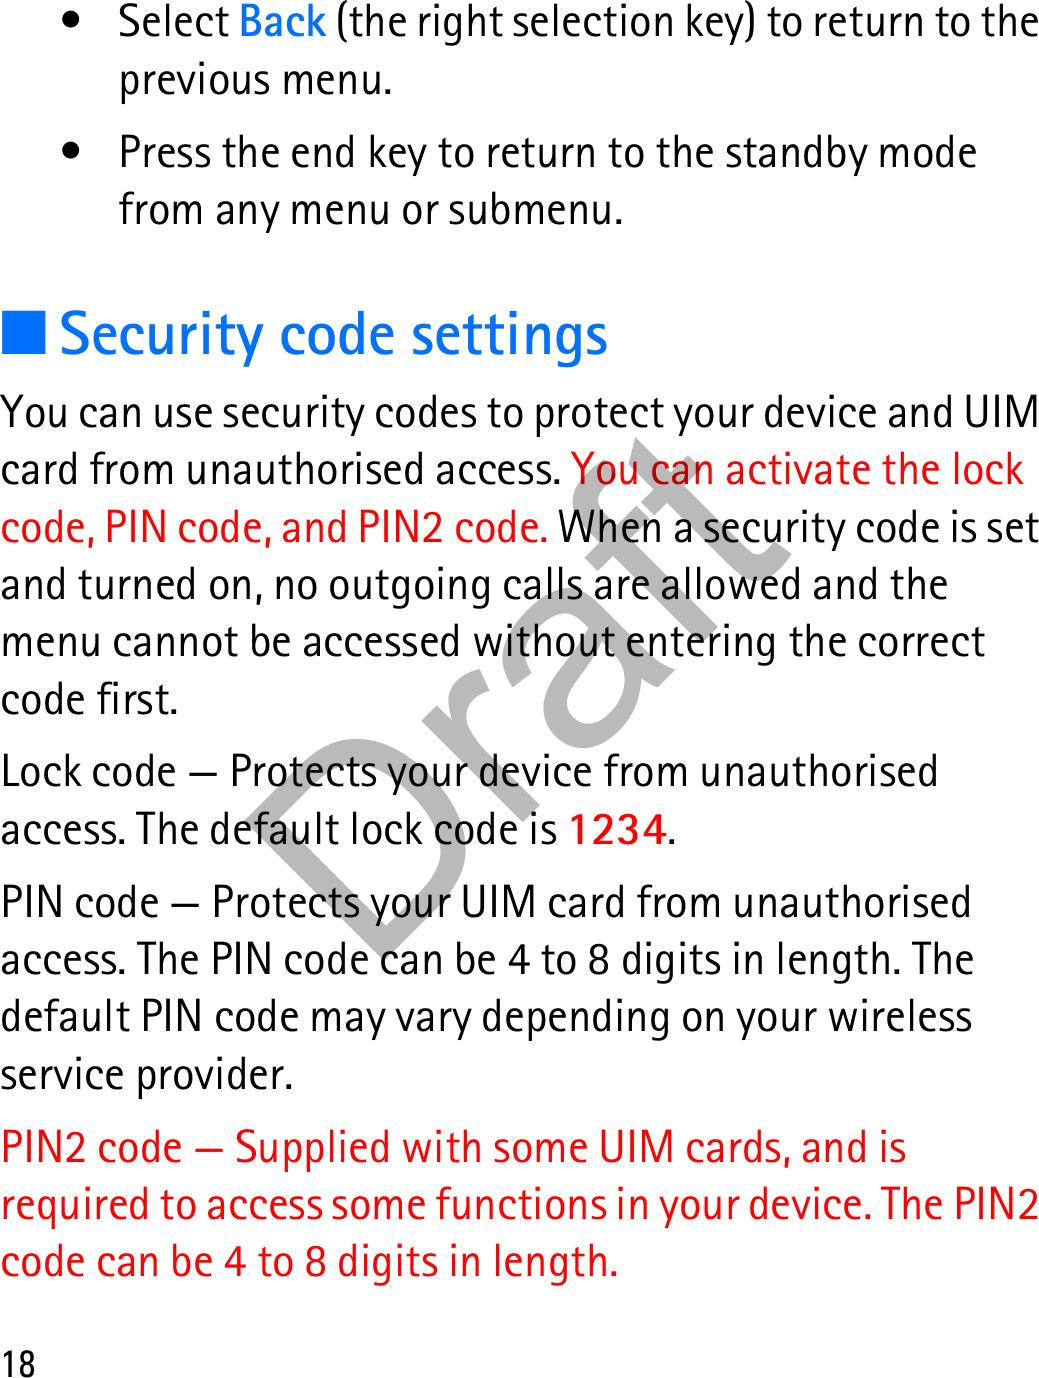 18•Select Back (the right selection key) to return to the previous menu.• Press the end key to return to the standby mode from any menu or submenu.■Security code settingsYou can use security codes to protect your device and UIM card from unauthorised access. You can activate the lock code, PIN code, and PIN2 code. When a security code is set and turned on, no outgoing calls are allowed and the menu cannot be accessed without entering the correct code first.Lock code — Protects your device from unauthorised access. The default lock code is 1234.PIN code — Protects your UIM card from unauthorised access. The PIN code can be 4 to 8 digits in length. The default PIN code may vary depending on your wireless service provider.PIN2 code — Supplied with some UIM cards, and is required to access some functions in your device. The PIN2 code can be 4 to 8 digits in length.Draft